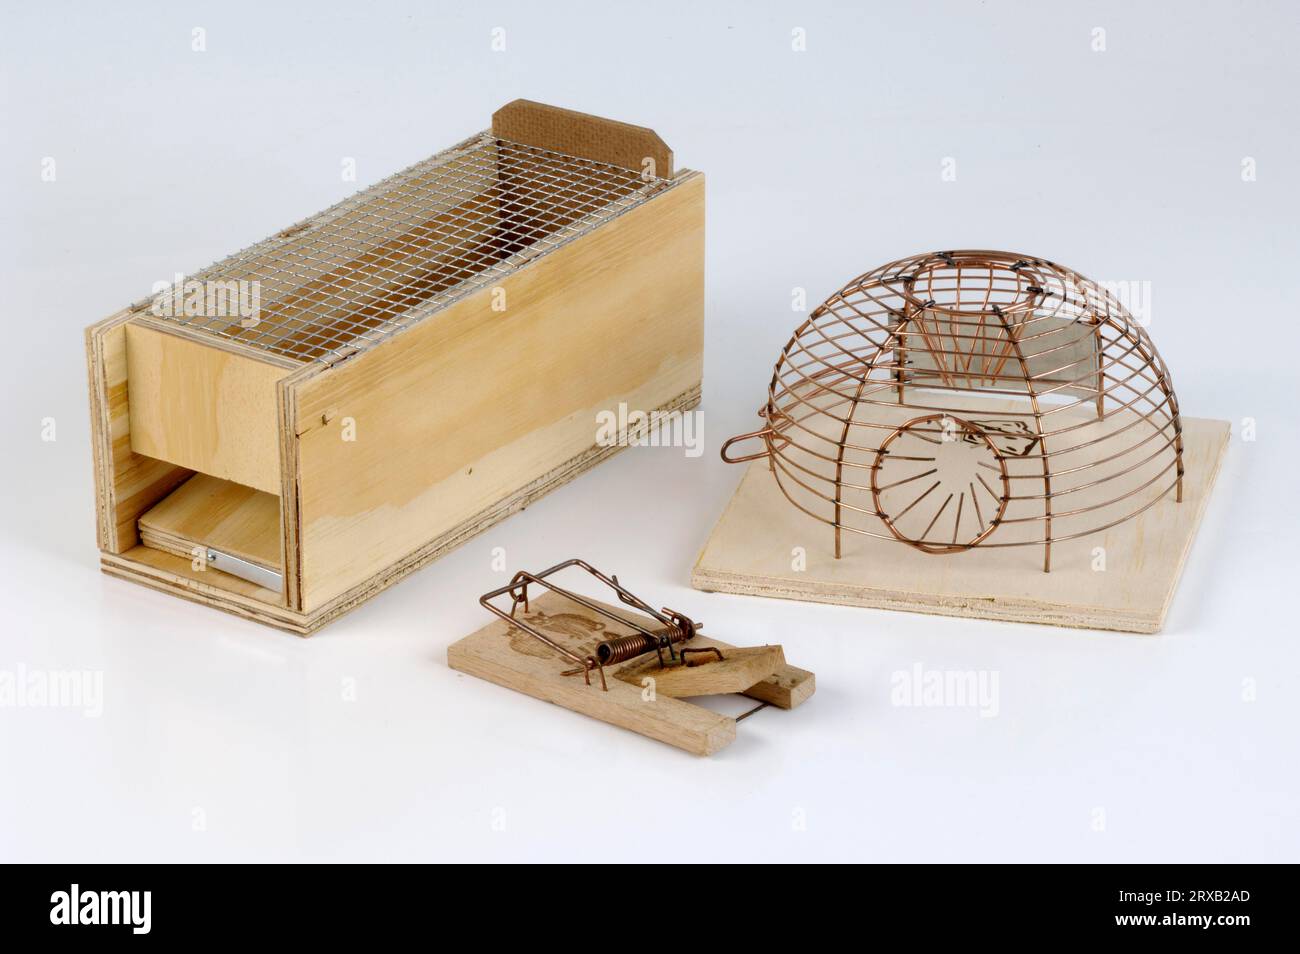 https://c8.alamy.com/comp/2RXB2AD/live-traps-and-beating-traps-for-mice-exemption-object-live-trap-mousetrap-mouse-traps-mouse-traps-2RXB2AD.jpg